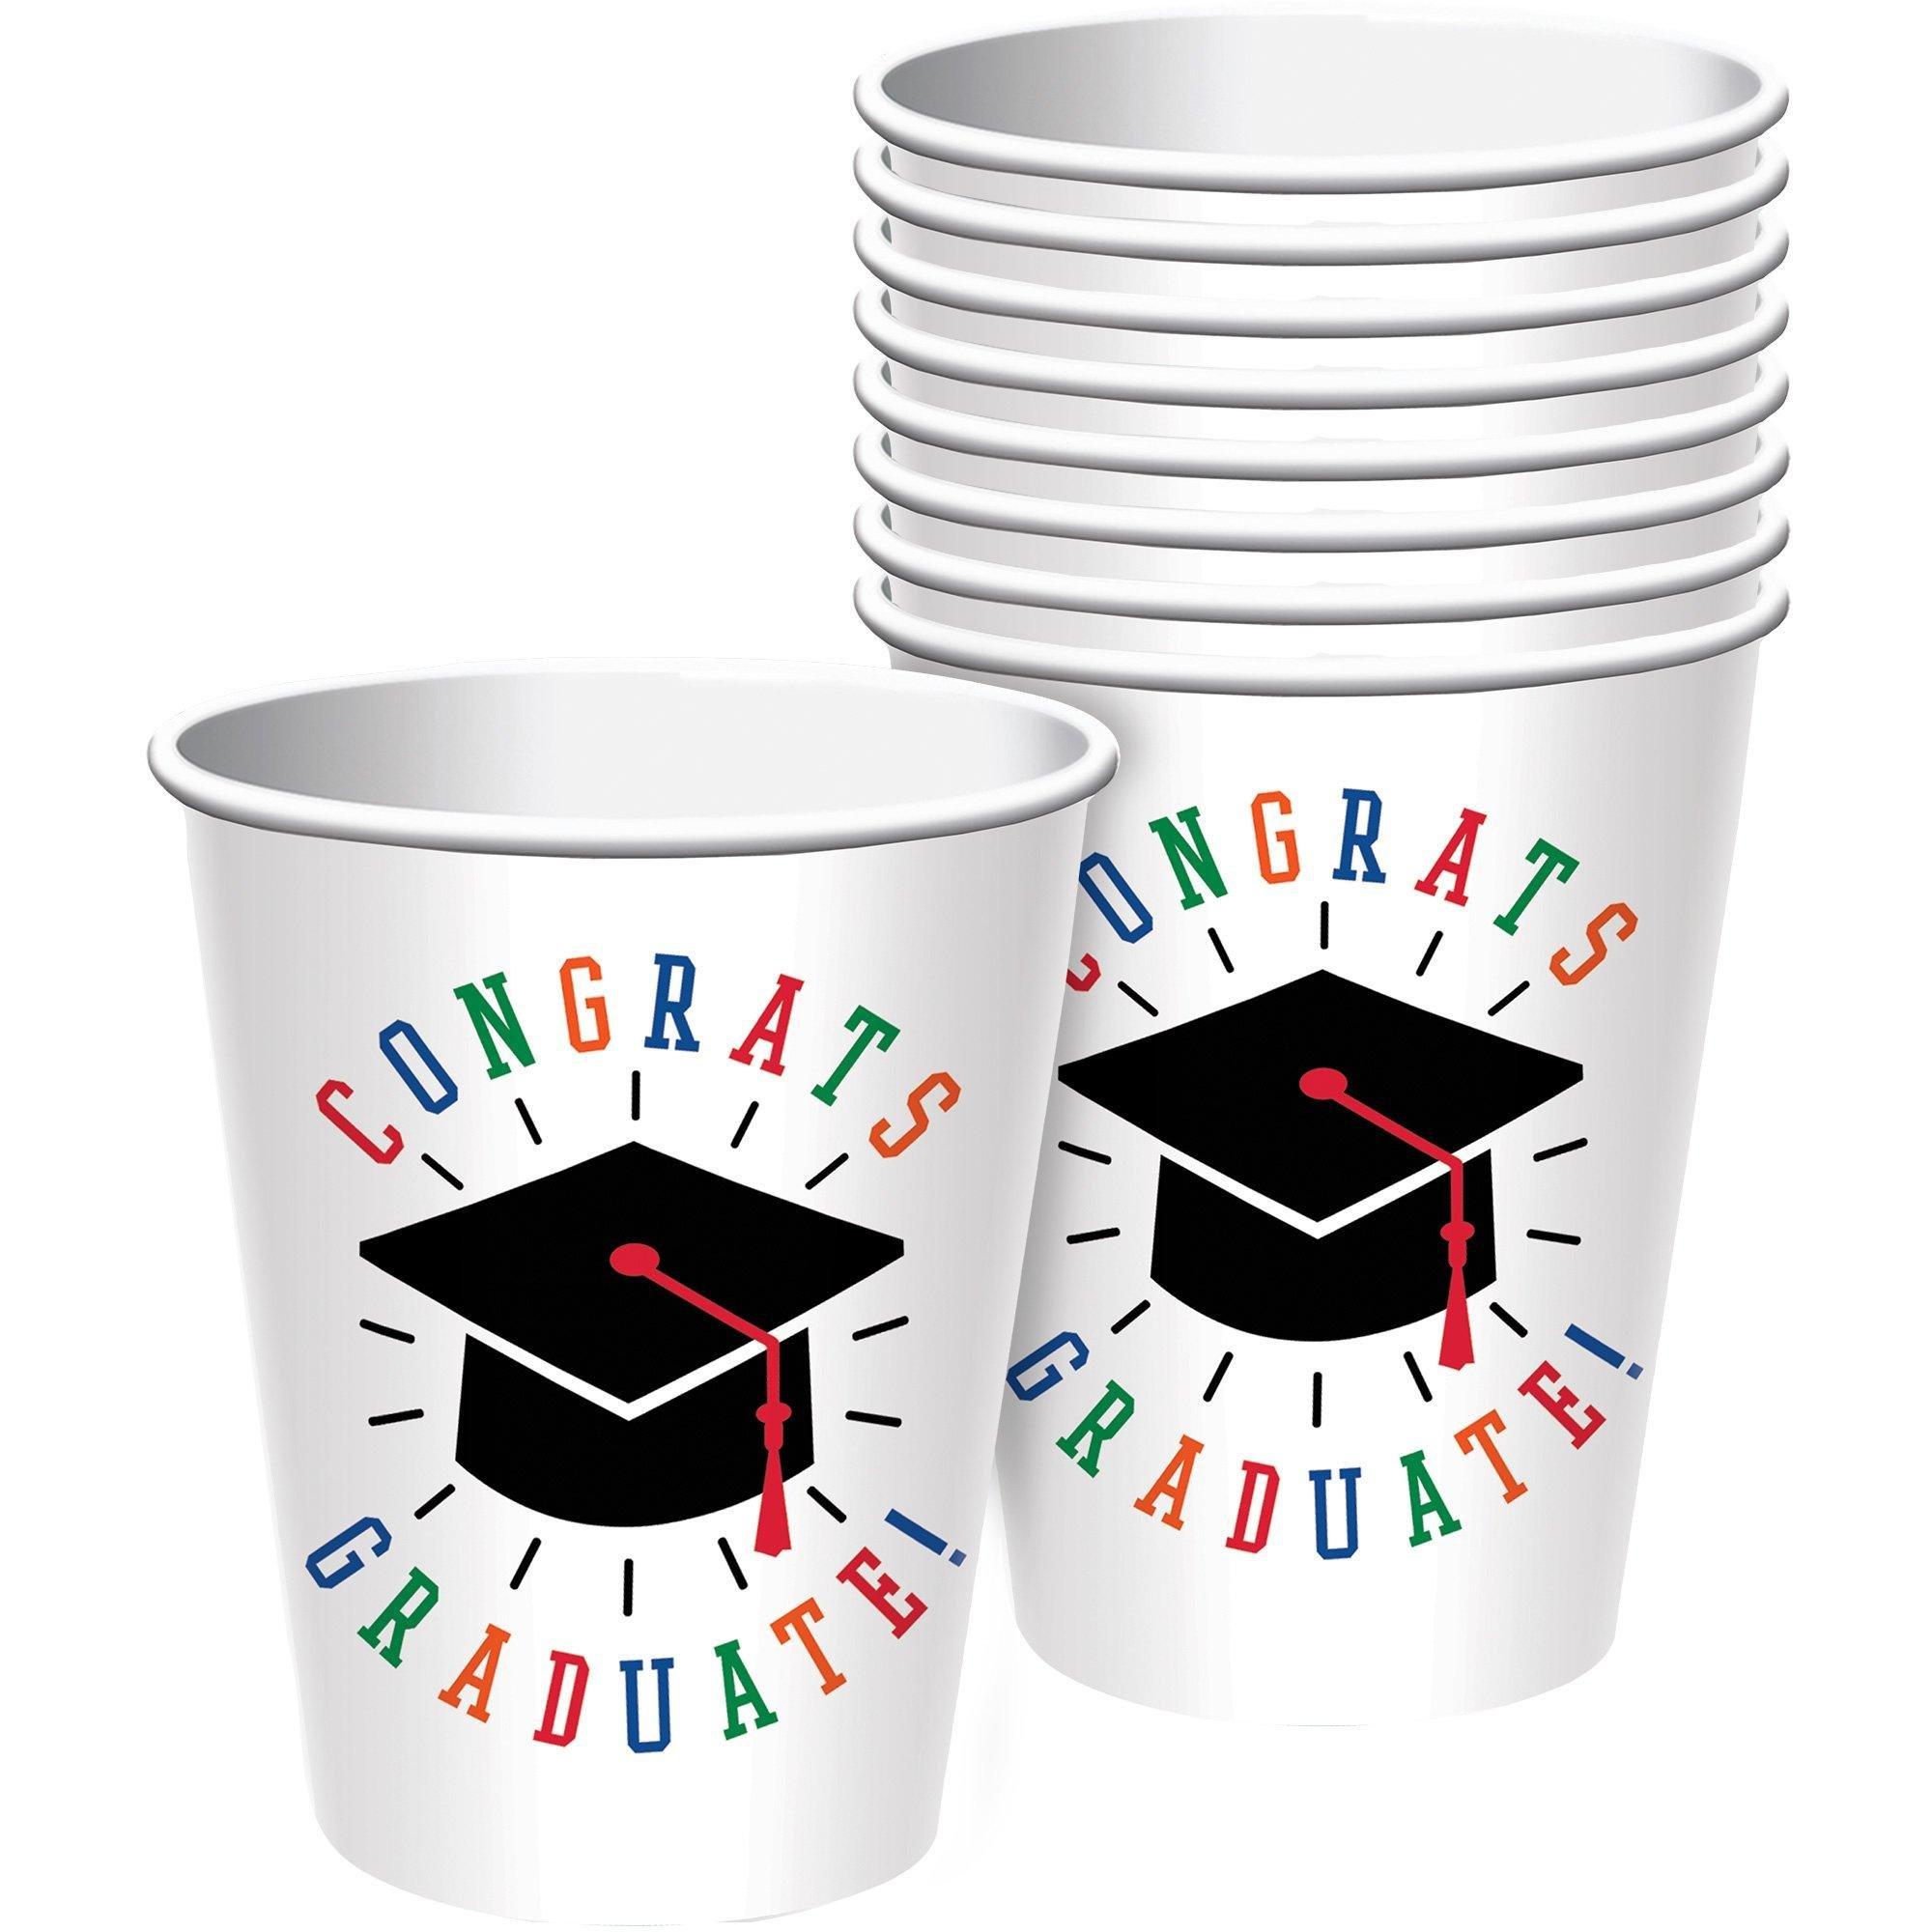 Graduation Party Supplies Kit for 30 with Decorations, Banners, Plates, Napkins, Cups - Doctor in the House